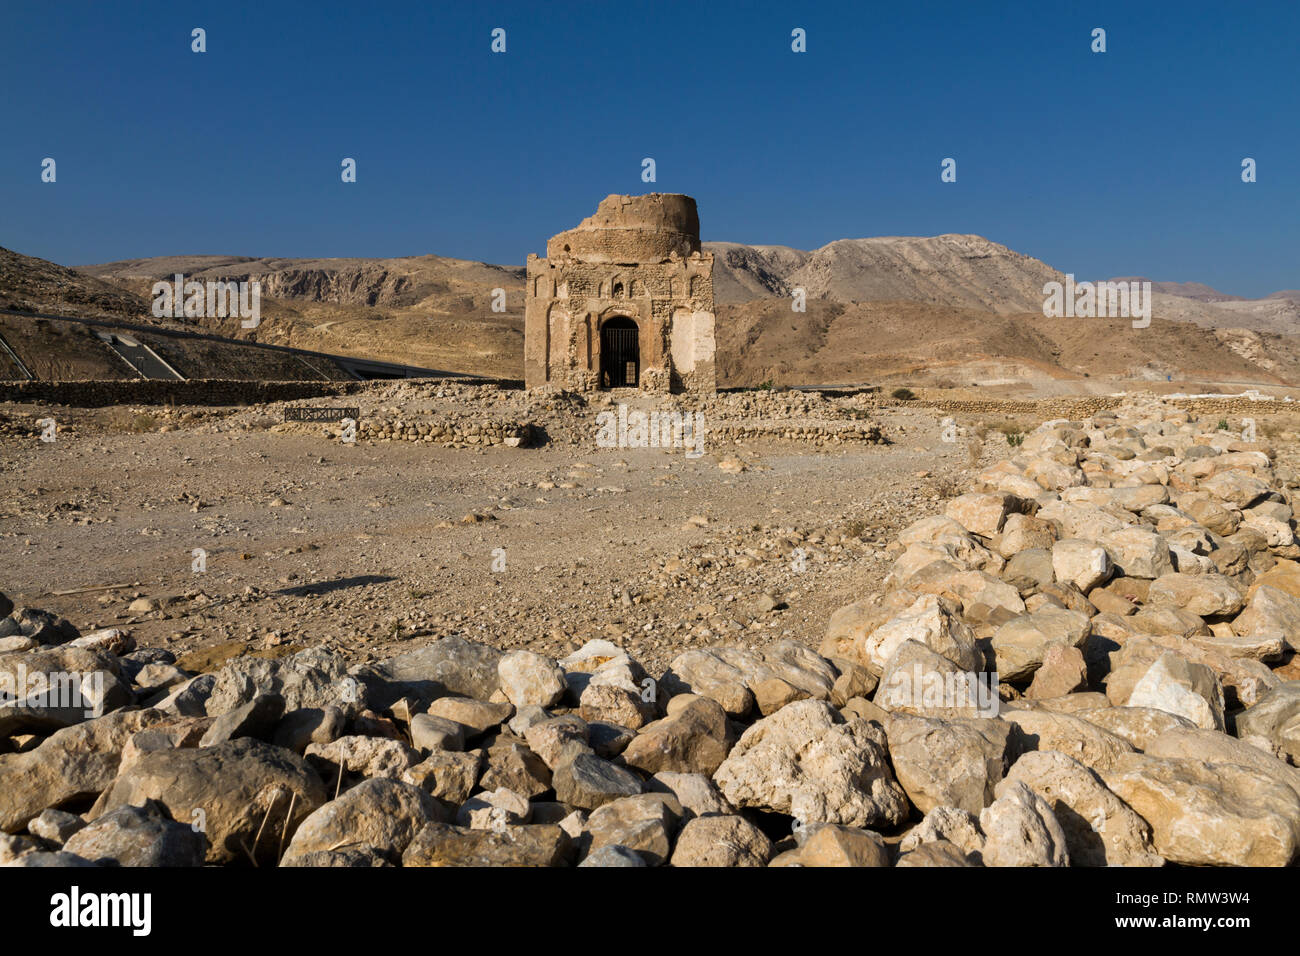 Bibi Maryam mausoleum in the ancient city of Qalhat near Sur,Oman. This site was added to the UNESCO World Heritage Tentative List - image Stock Photo